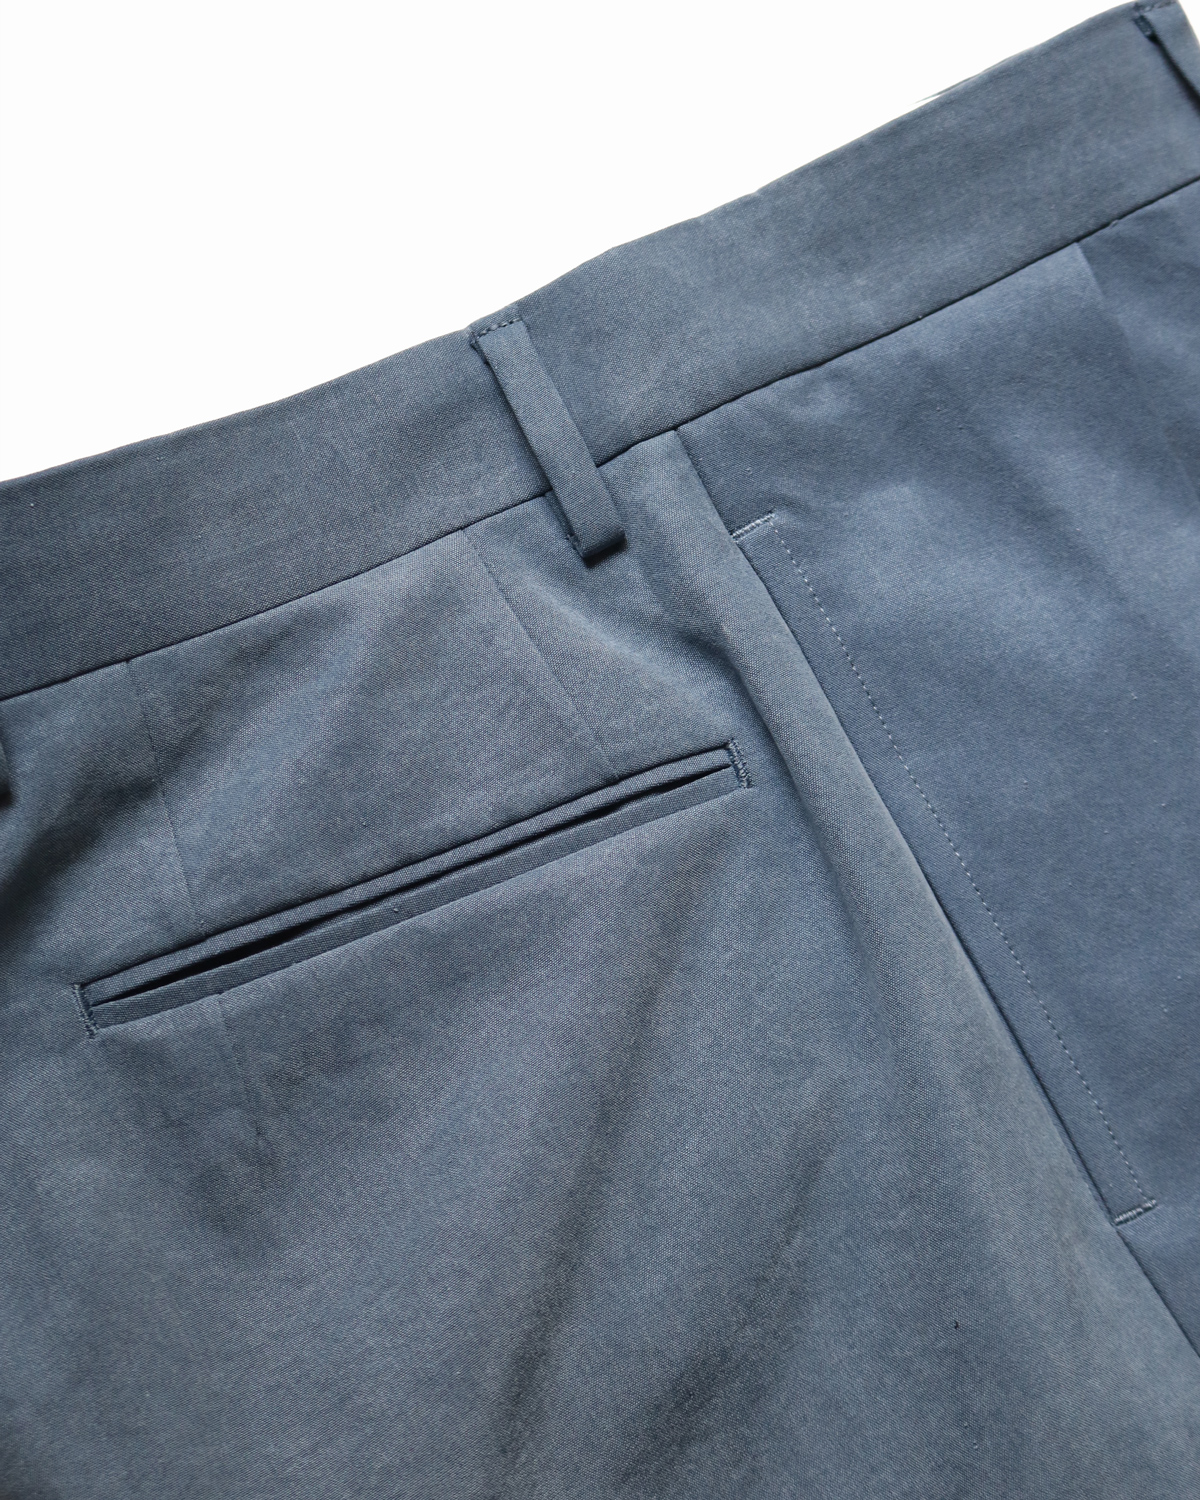 CELLULOSE NIDOM｜WIDE - Blue Gray｜NEAT